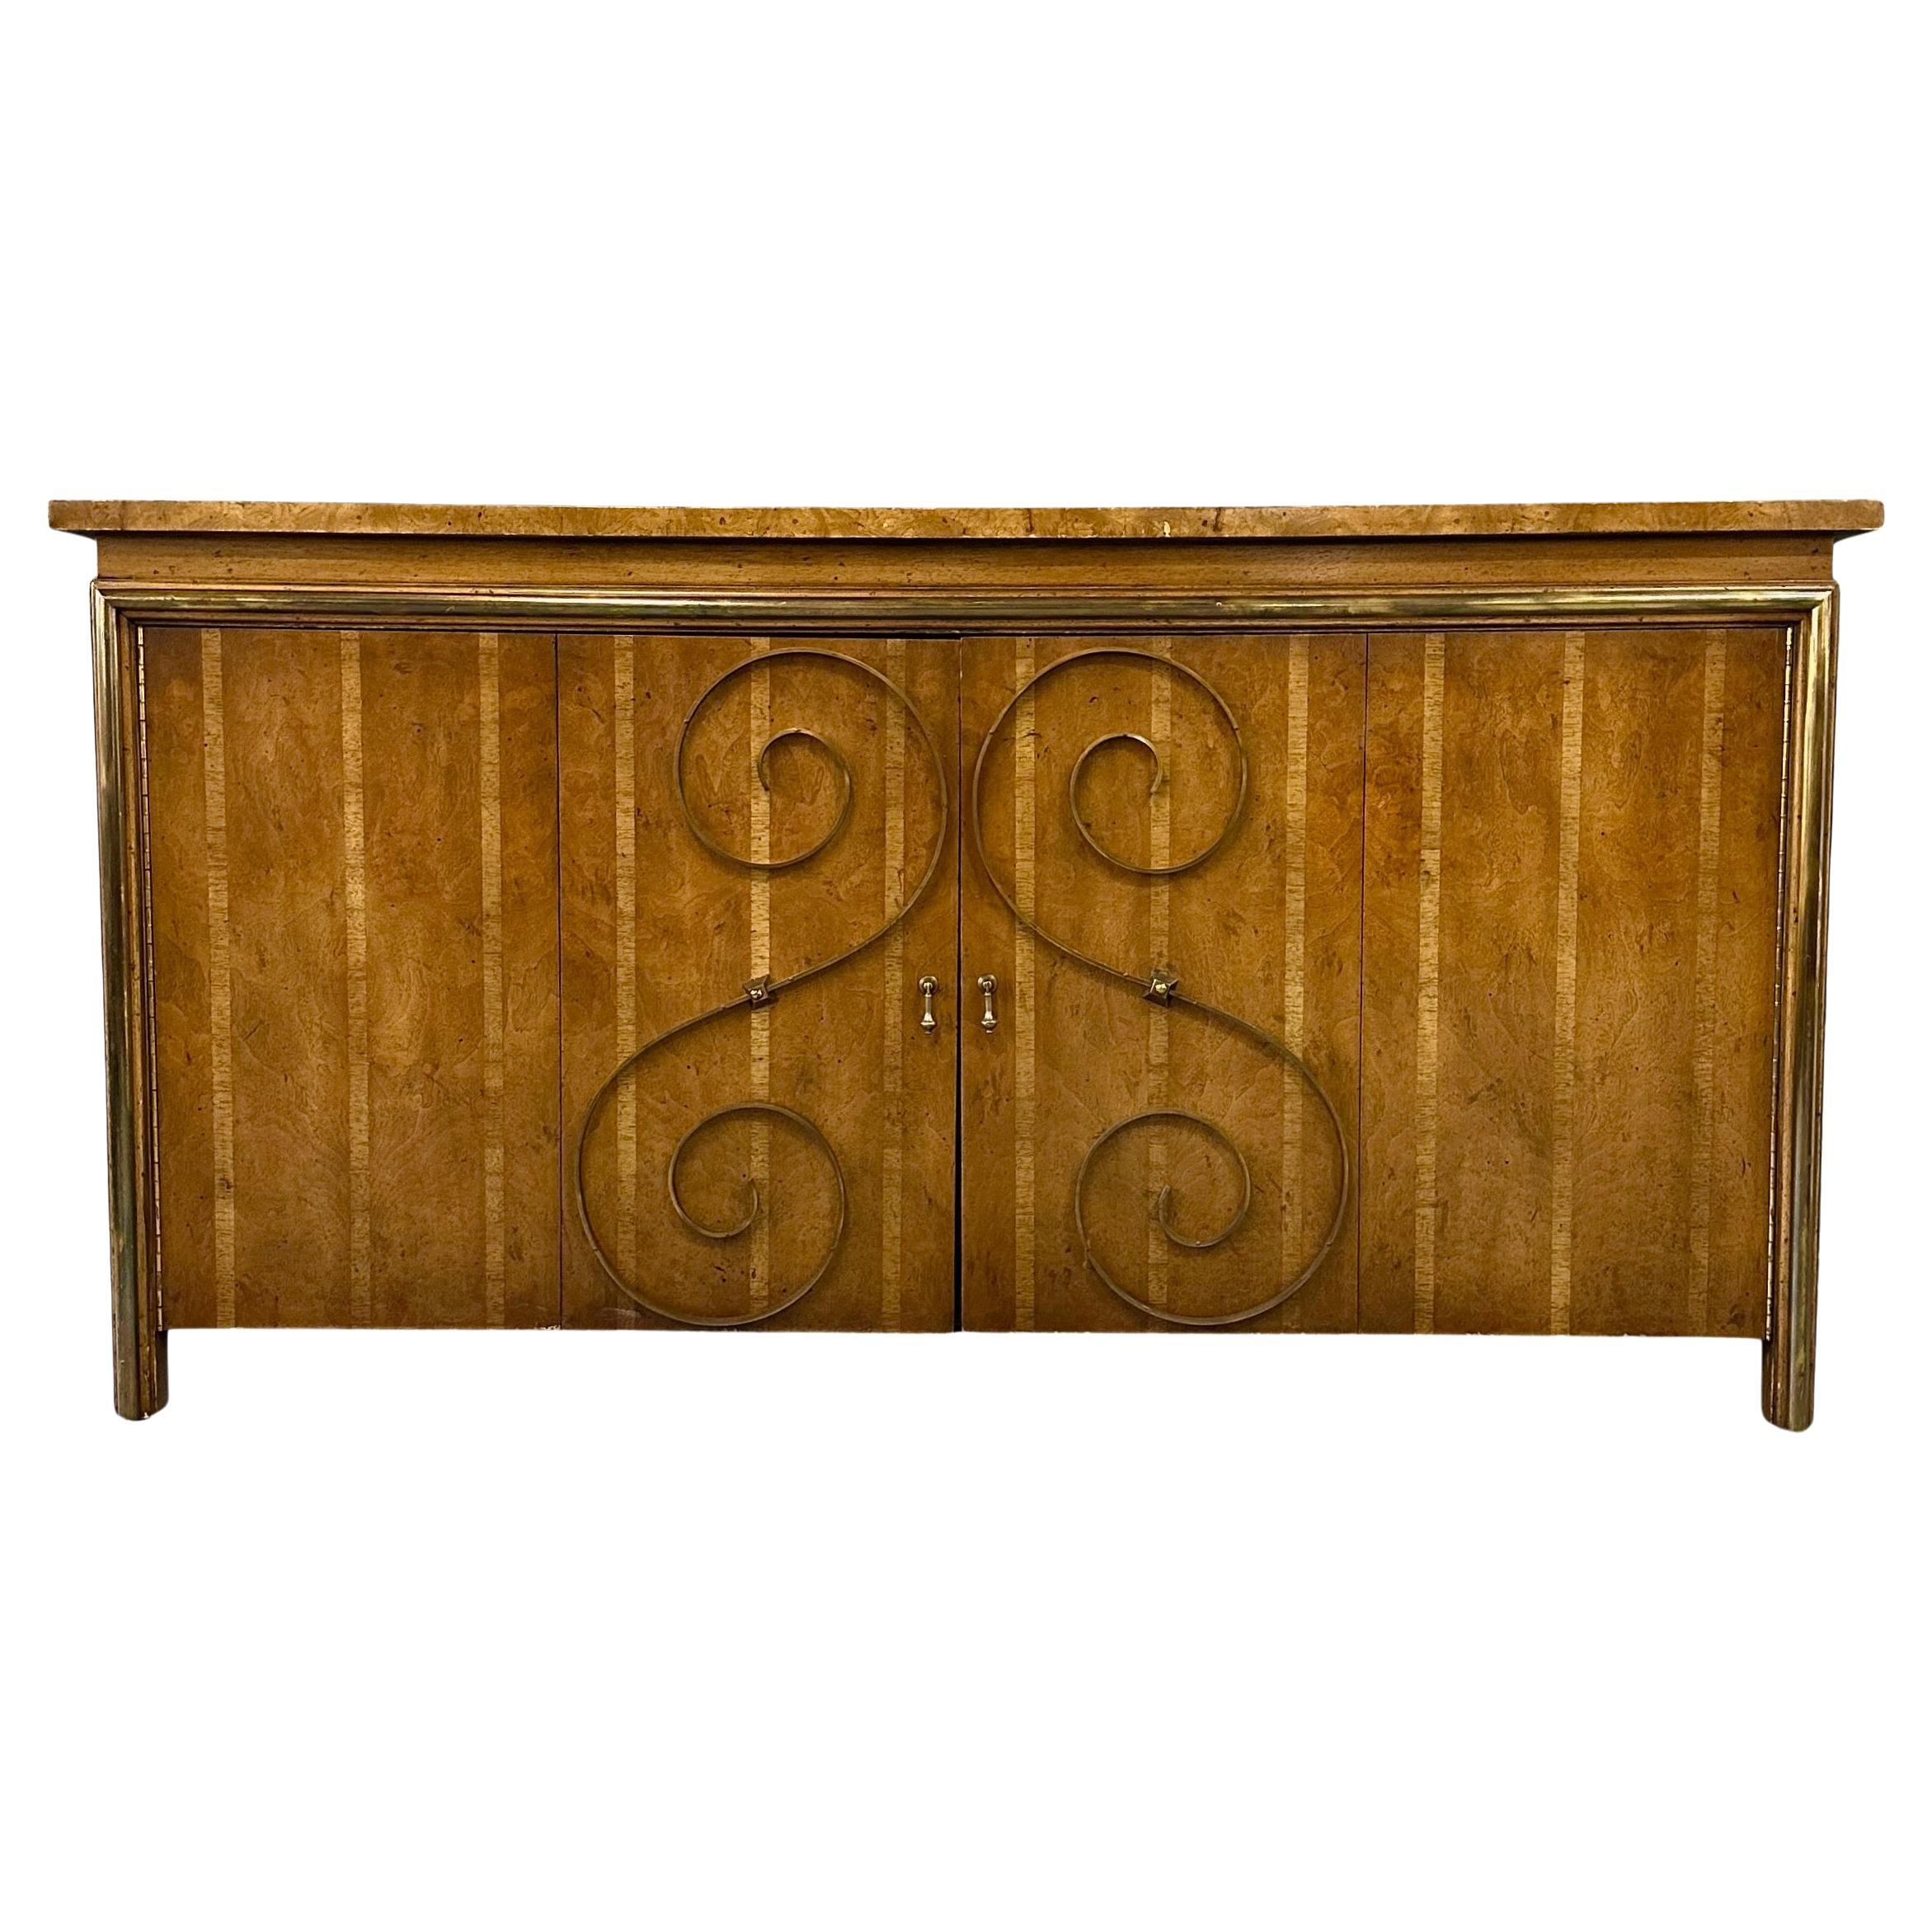 1950s Neoclassical Revival Sideboard in Pecan and Burl with Brass Scroll Details For Sale